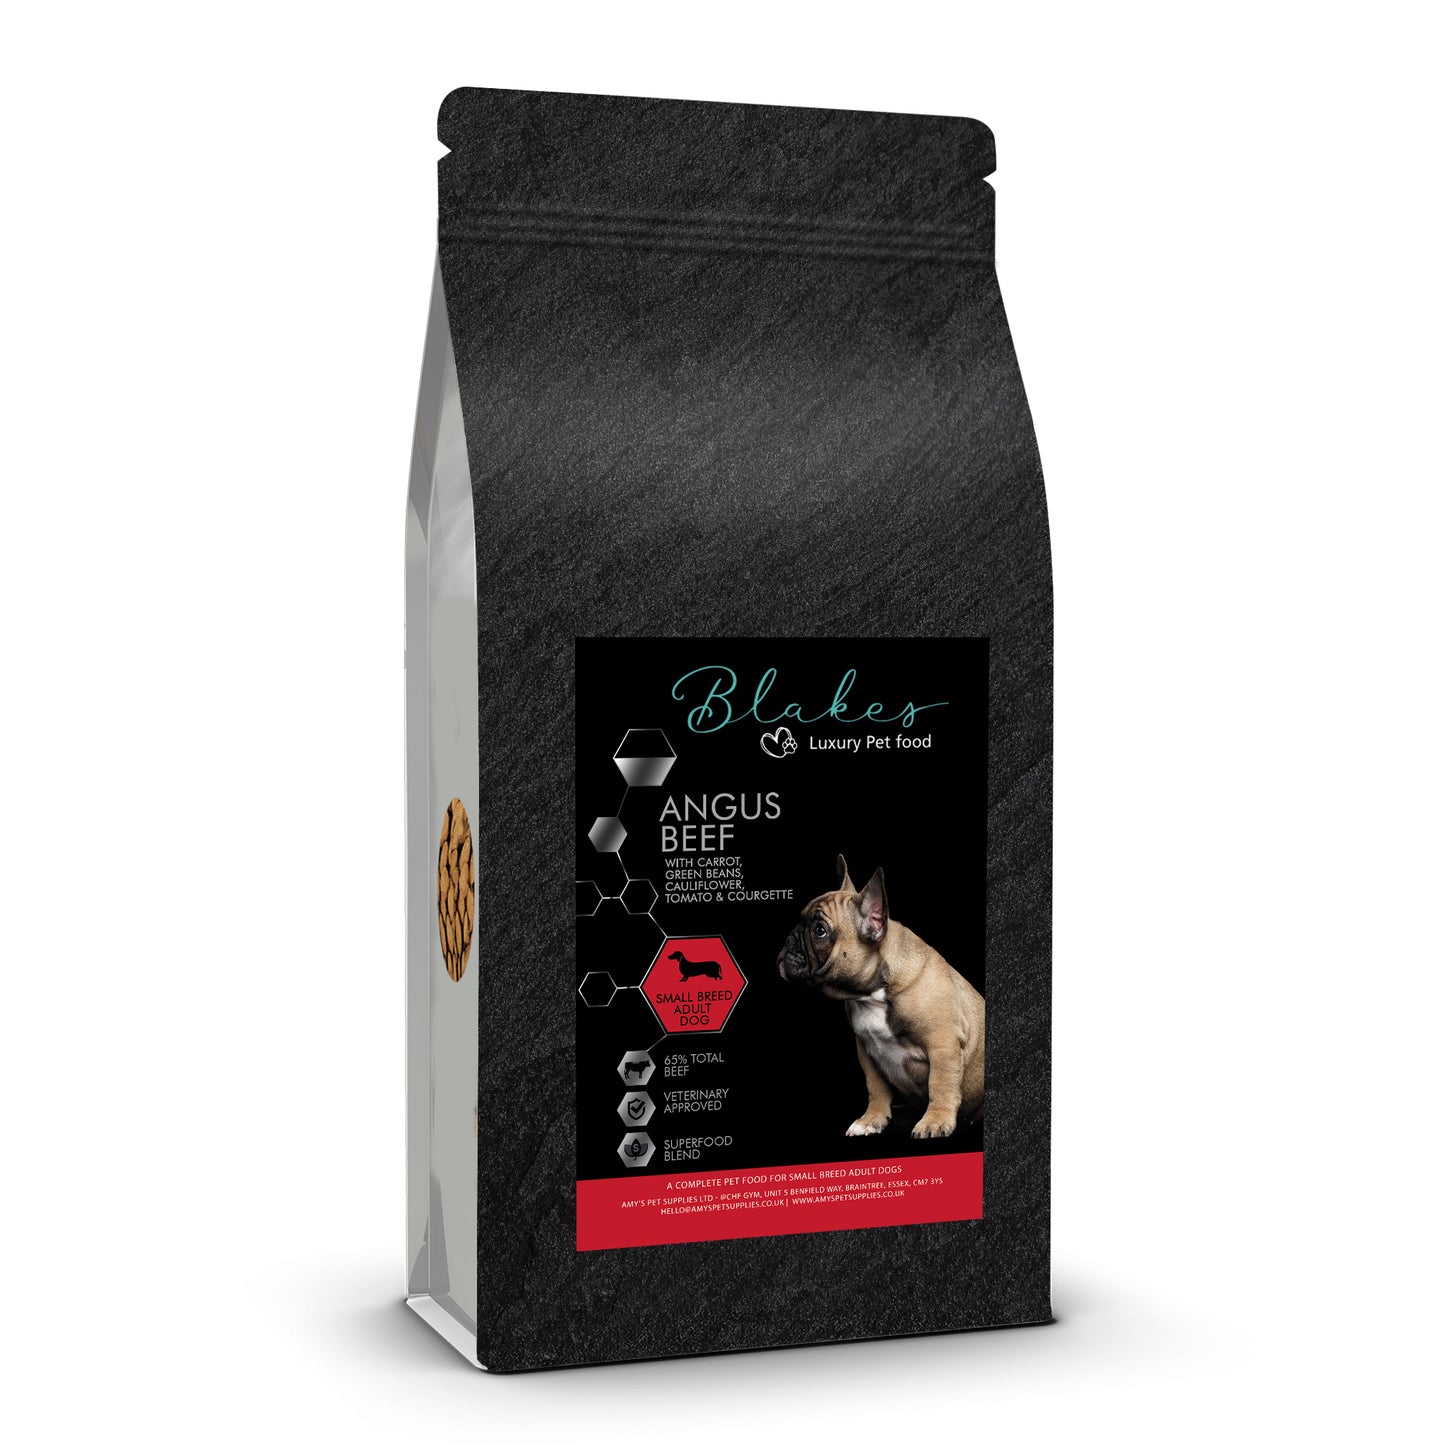 Blakes - Small Breed - Superfood Complete Dog food